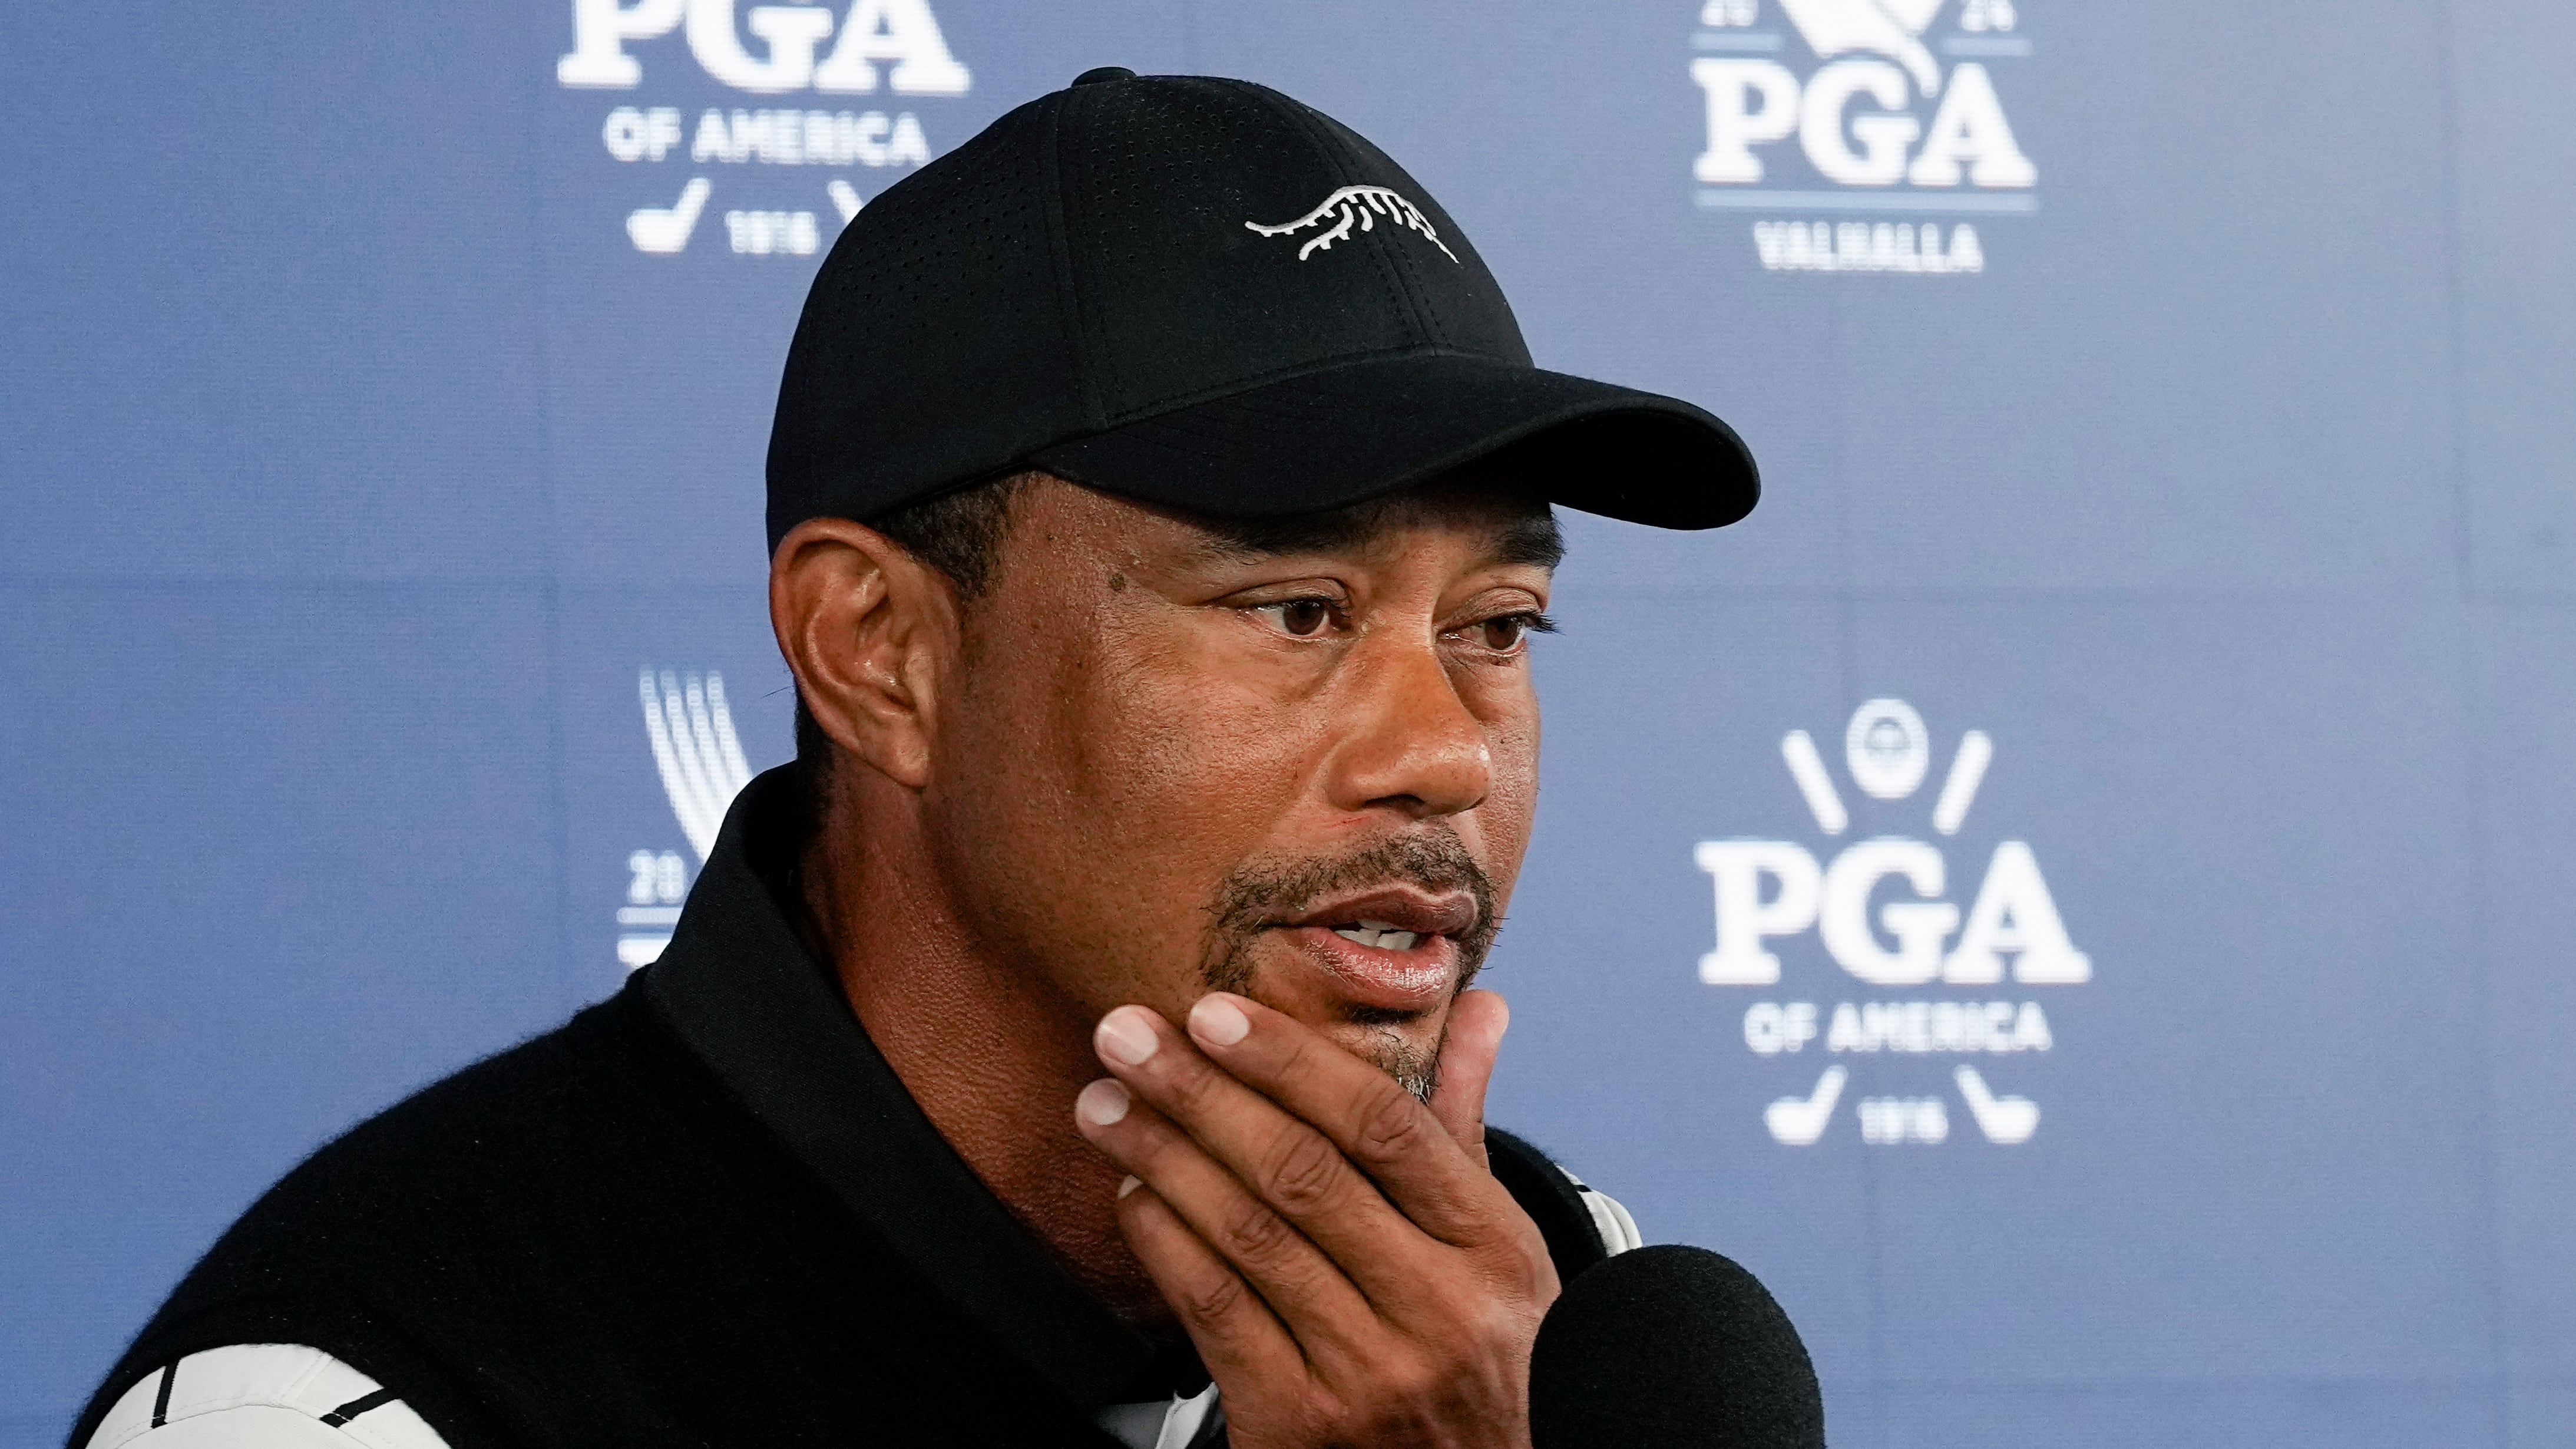 Tiger Woods was dealing with back problems the last time Valhalla staged the US PGA in 2014 and missed the cut (Sue Ogrocki/AP)